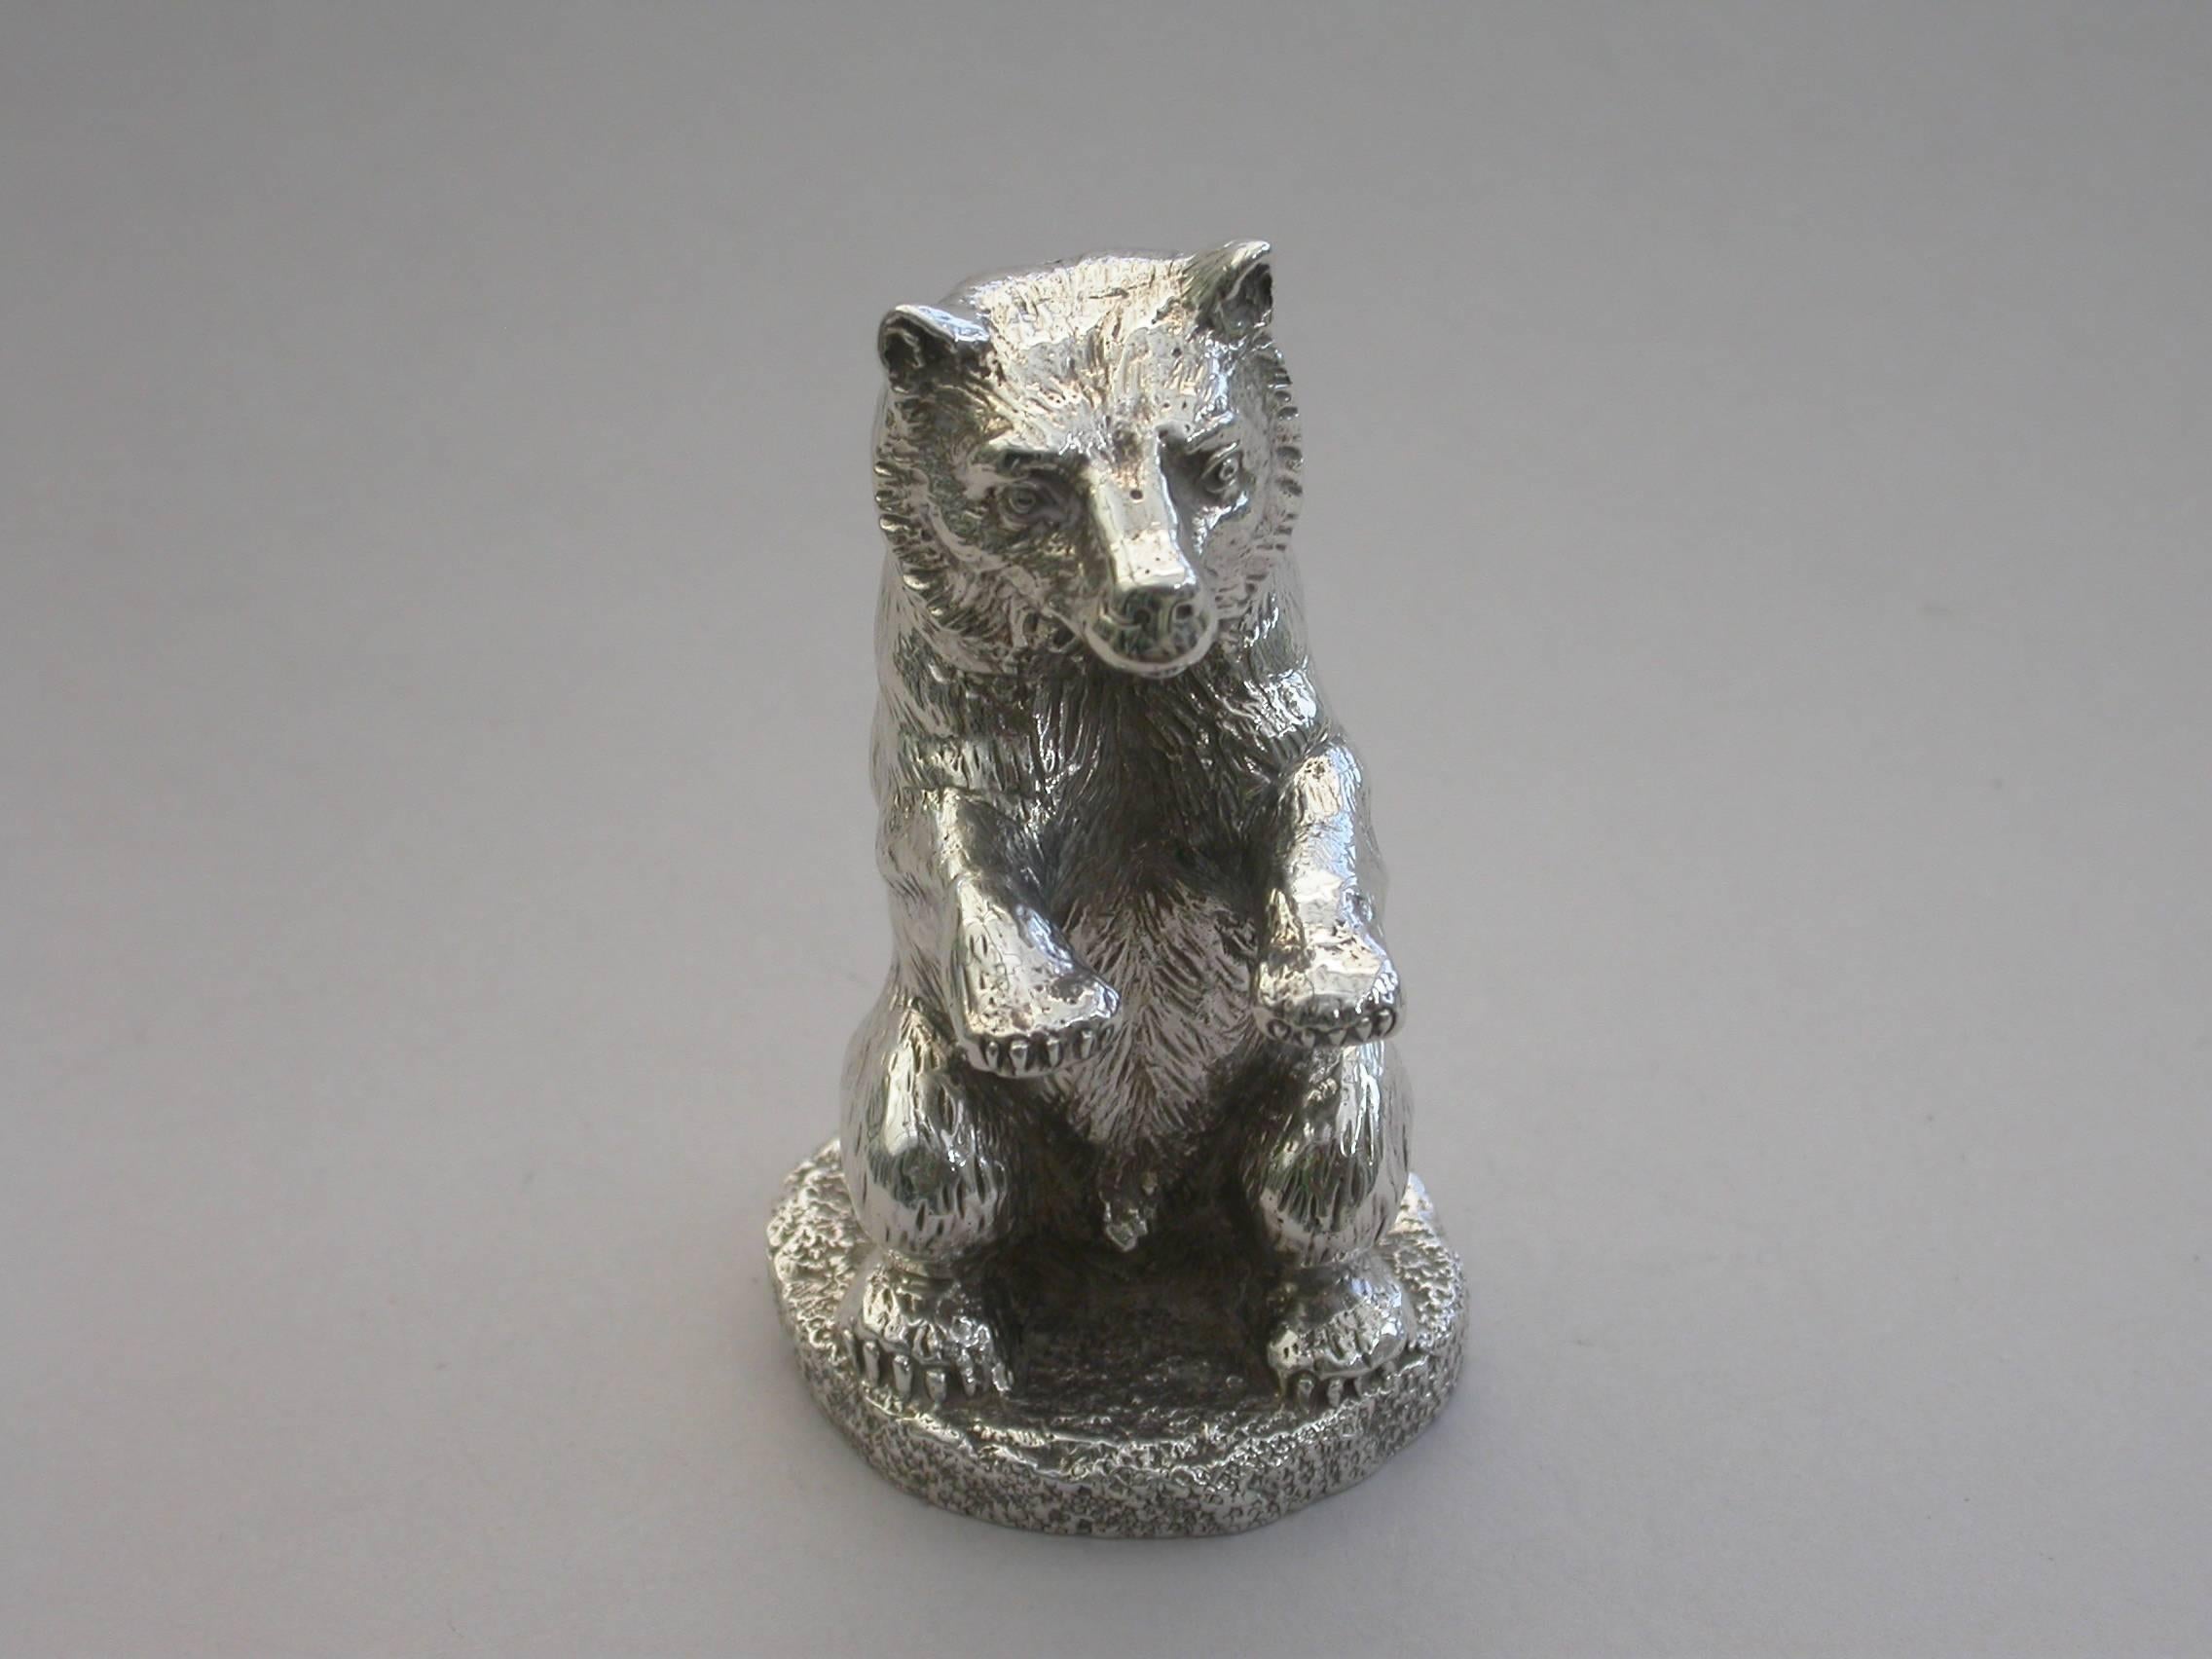 A fine quality Victorian cast silver novelty Pepper made in the form of a bear sitting on its hind legs, the circular base with hinged lid opening to reveal a silver gilt interior.

By E H Stockwell, London, 1875

In good condition with no